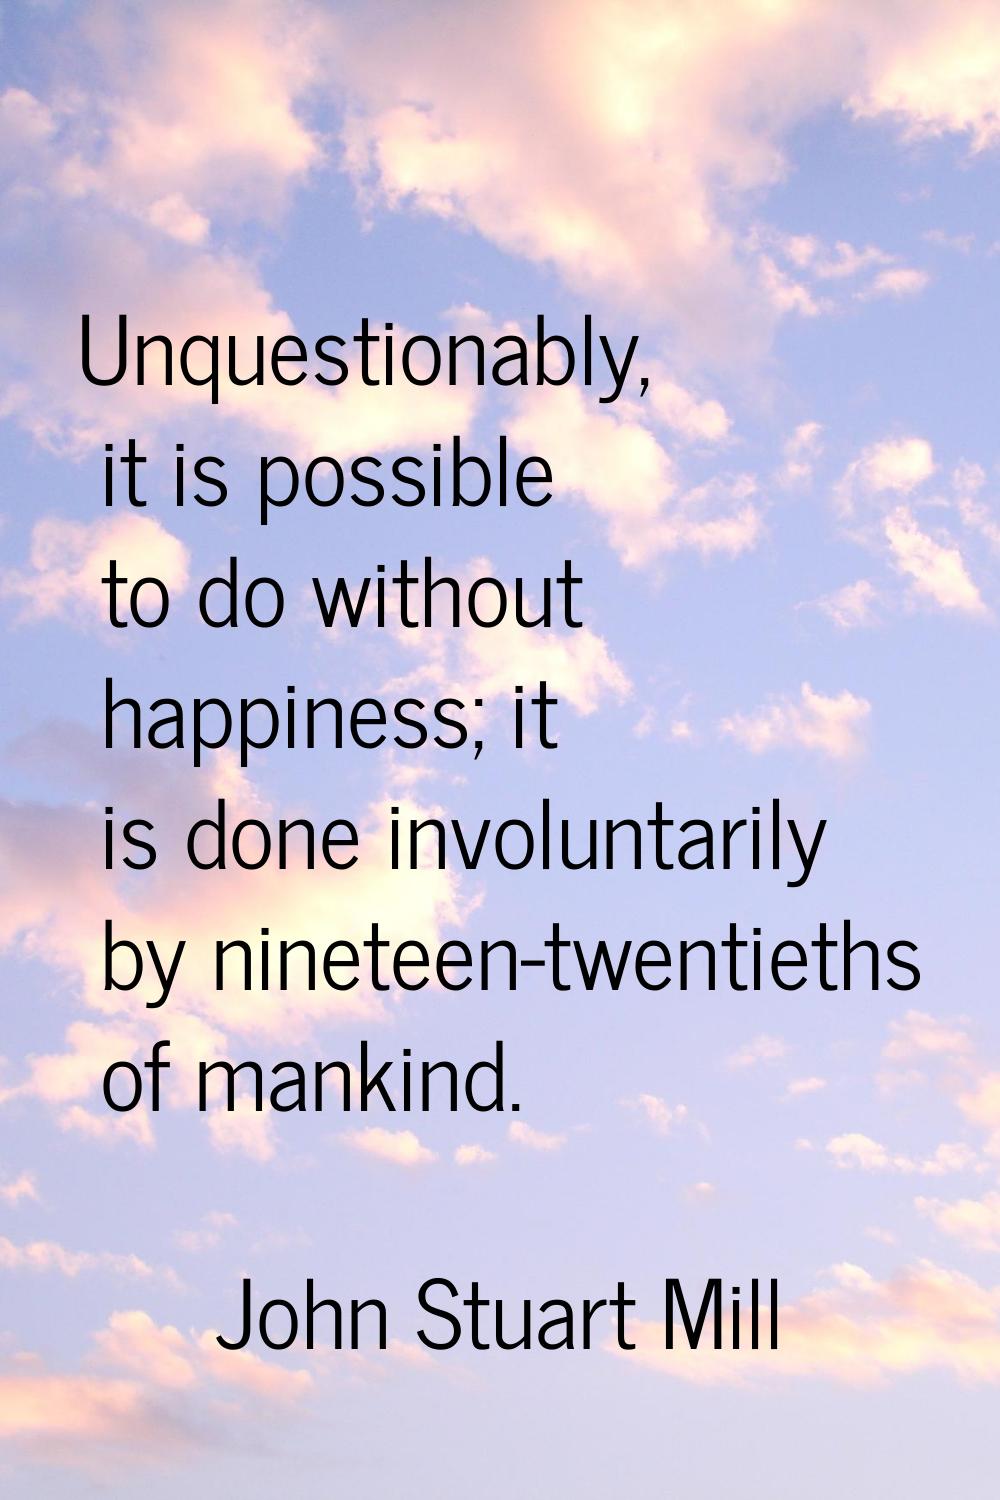 Unquestionably, it is possible to do without happiness; it is done involuntarily by nineteen-twenti